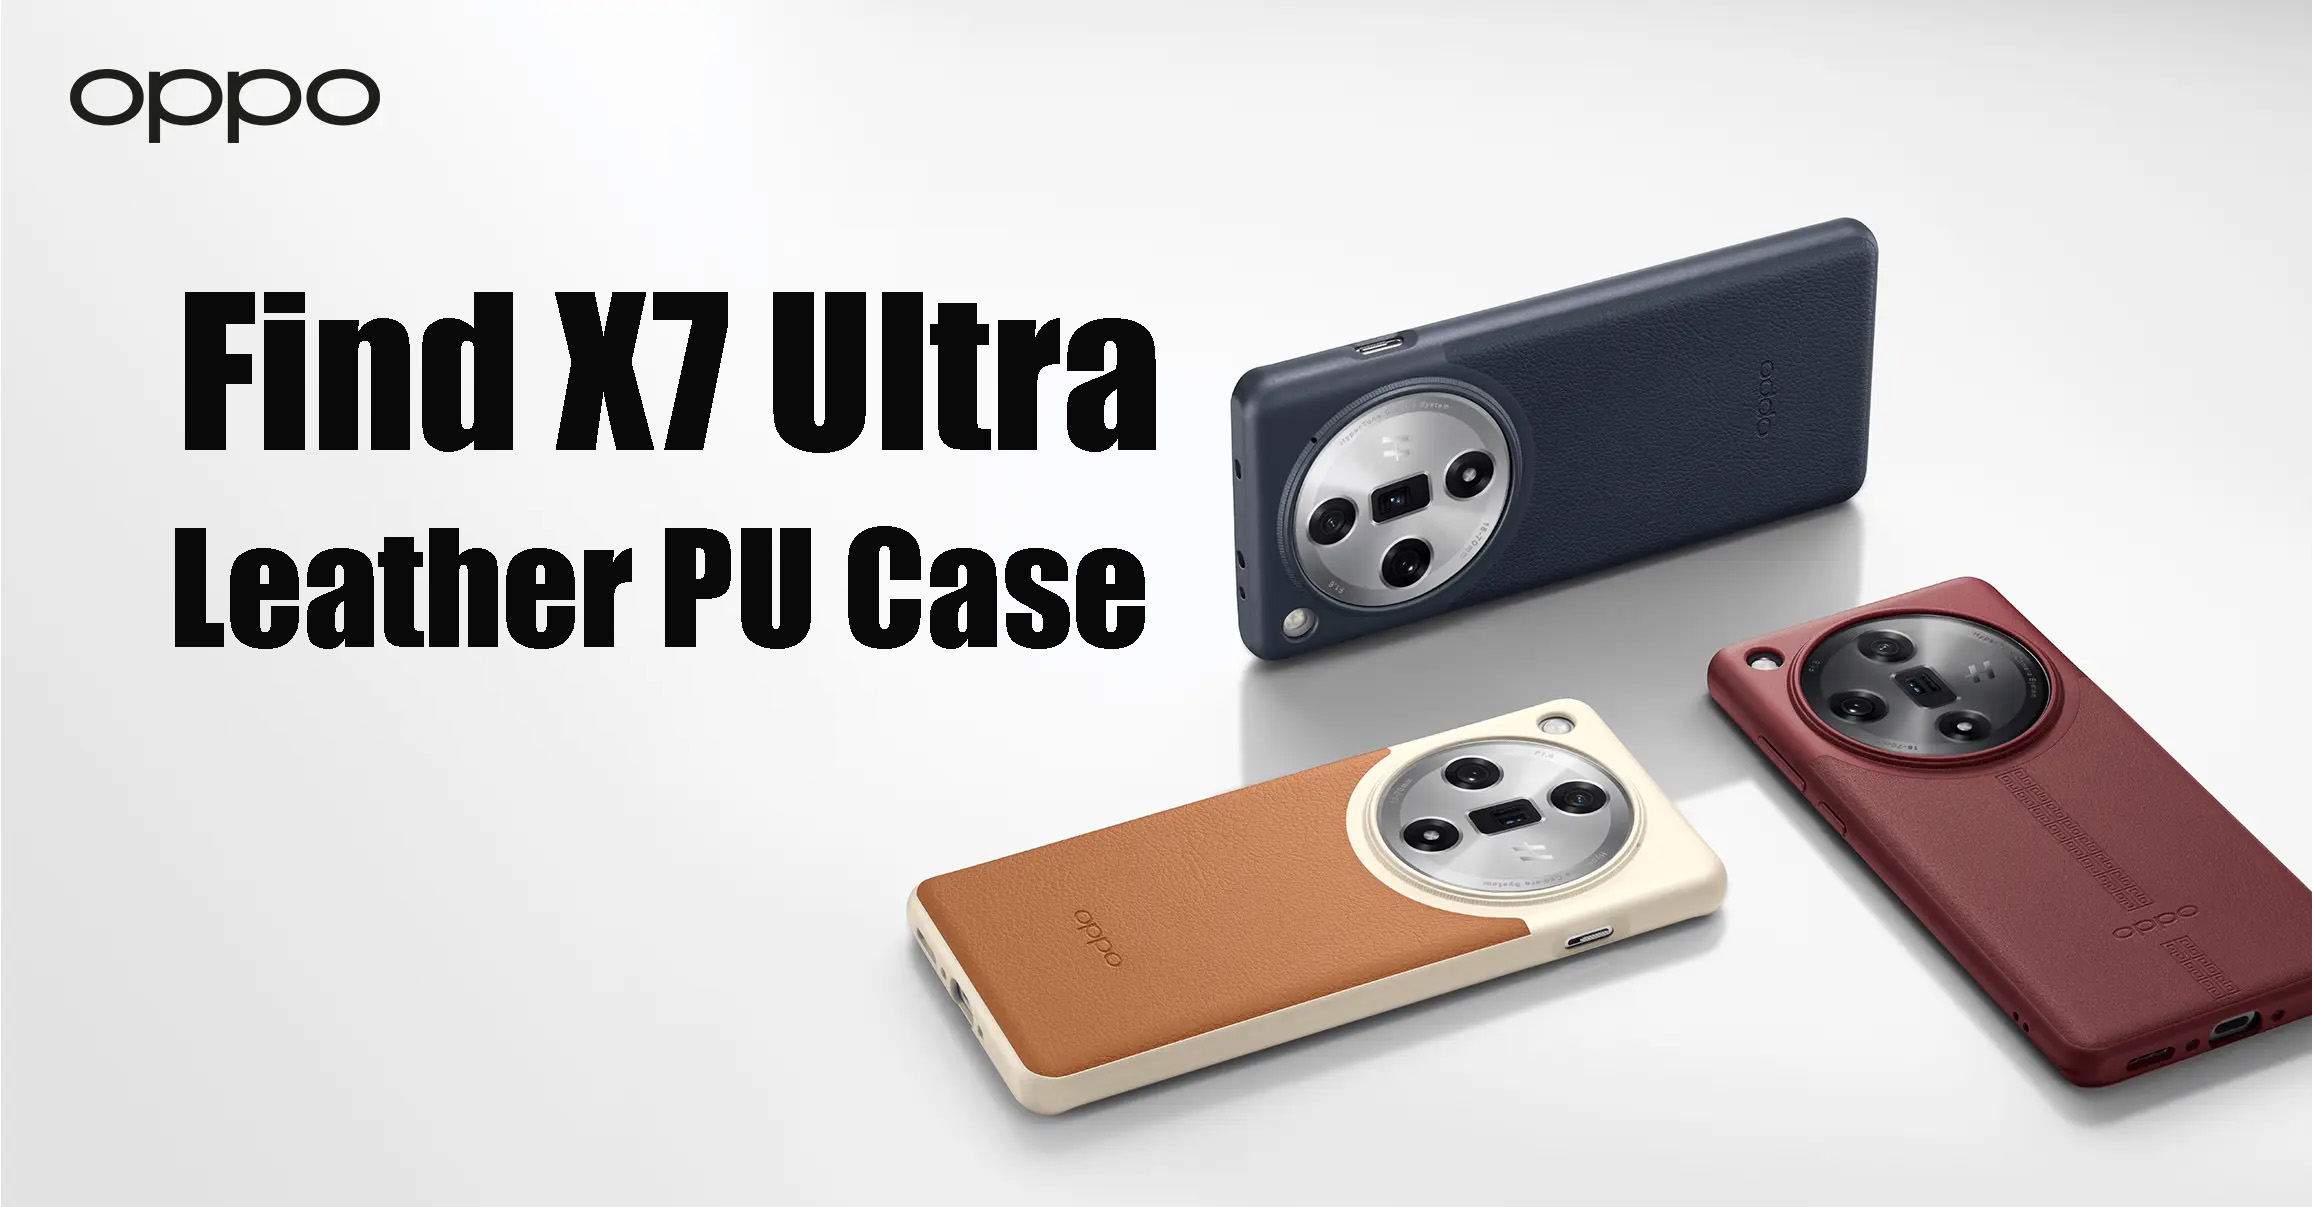 Official Original OPPO Find X7 Ultra Leather PU Case